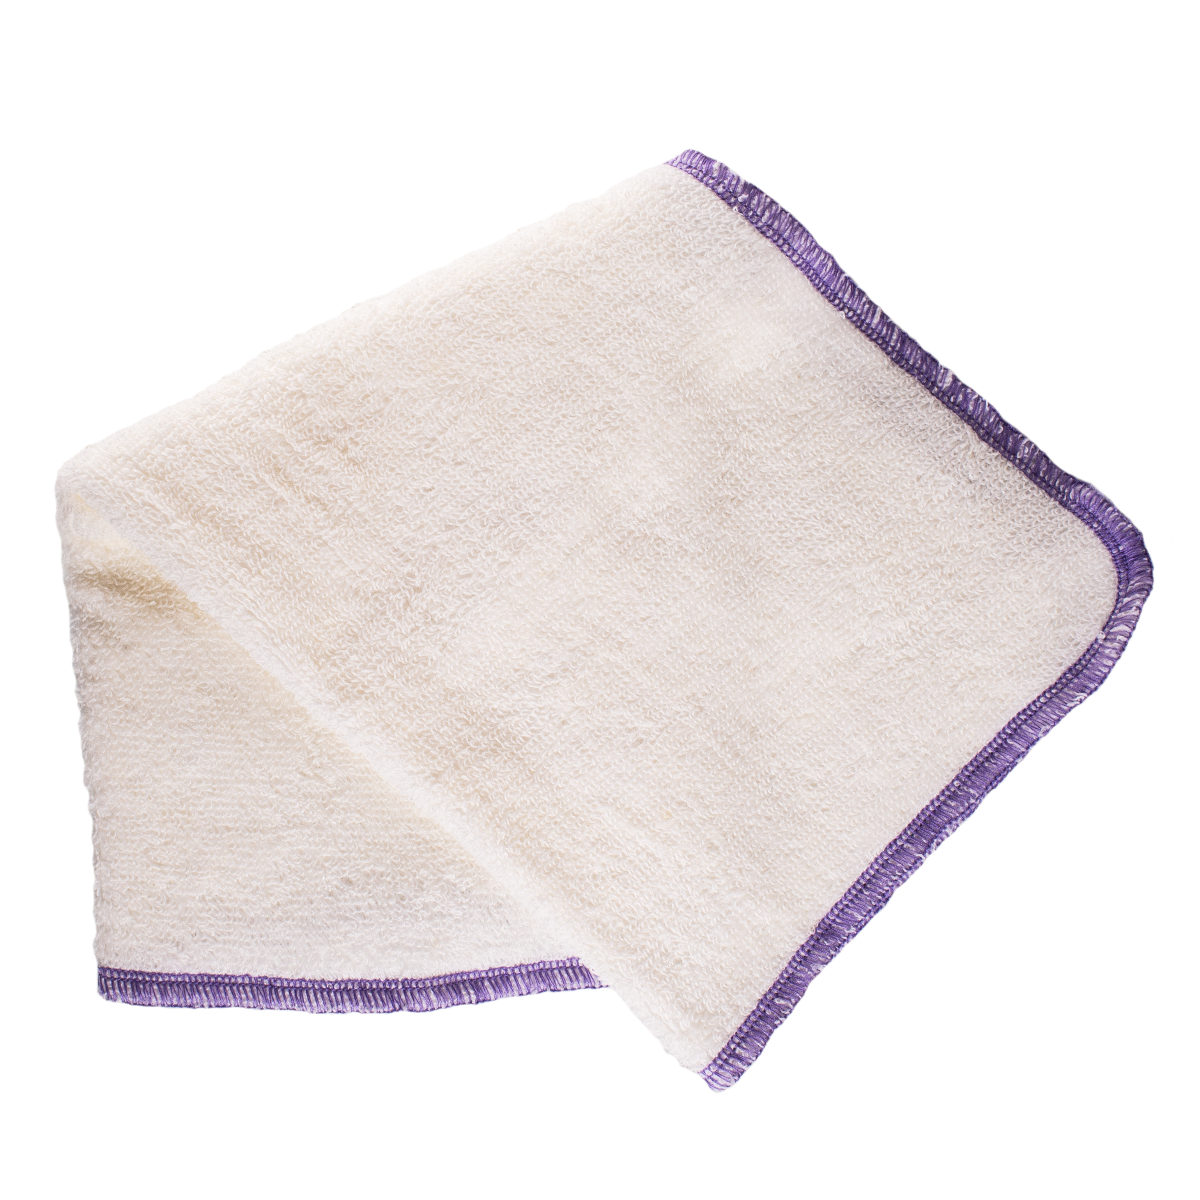 SINLAND Microfiber Dish Cloth for Washing Dishes Dish Rags Best